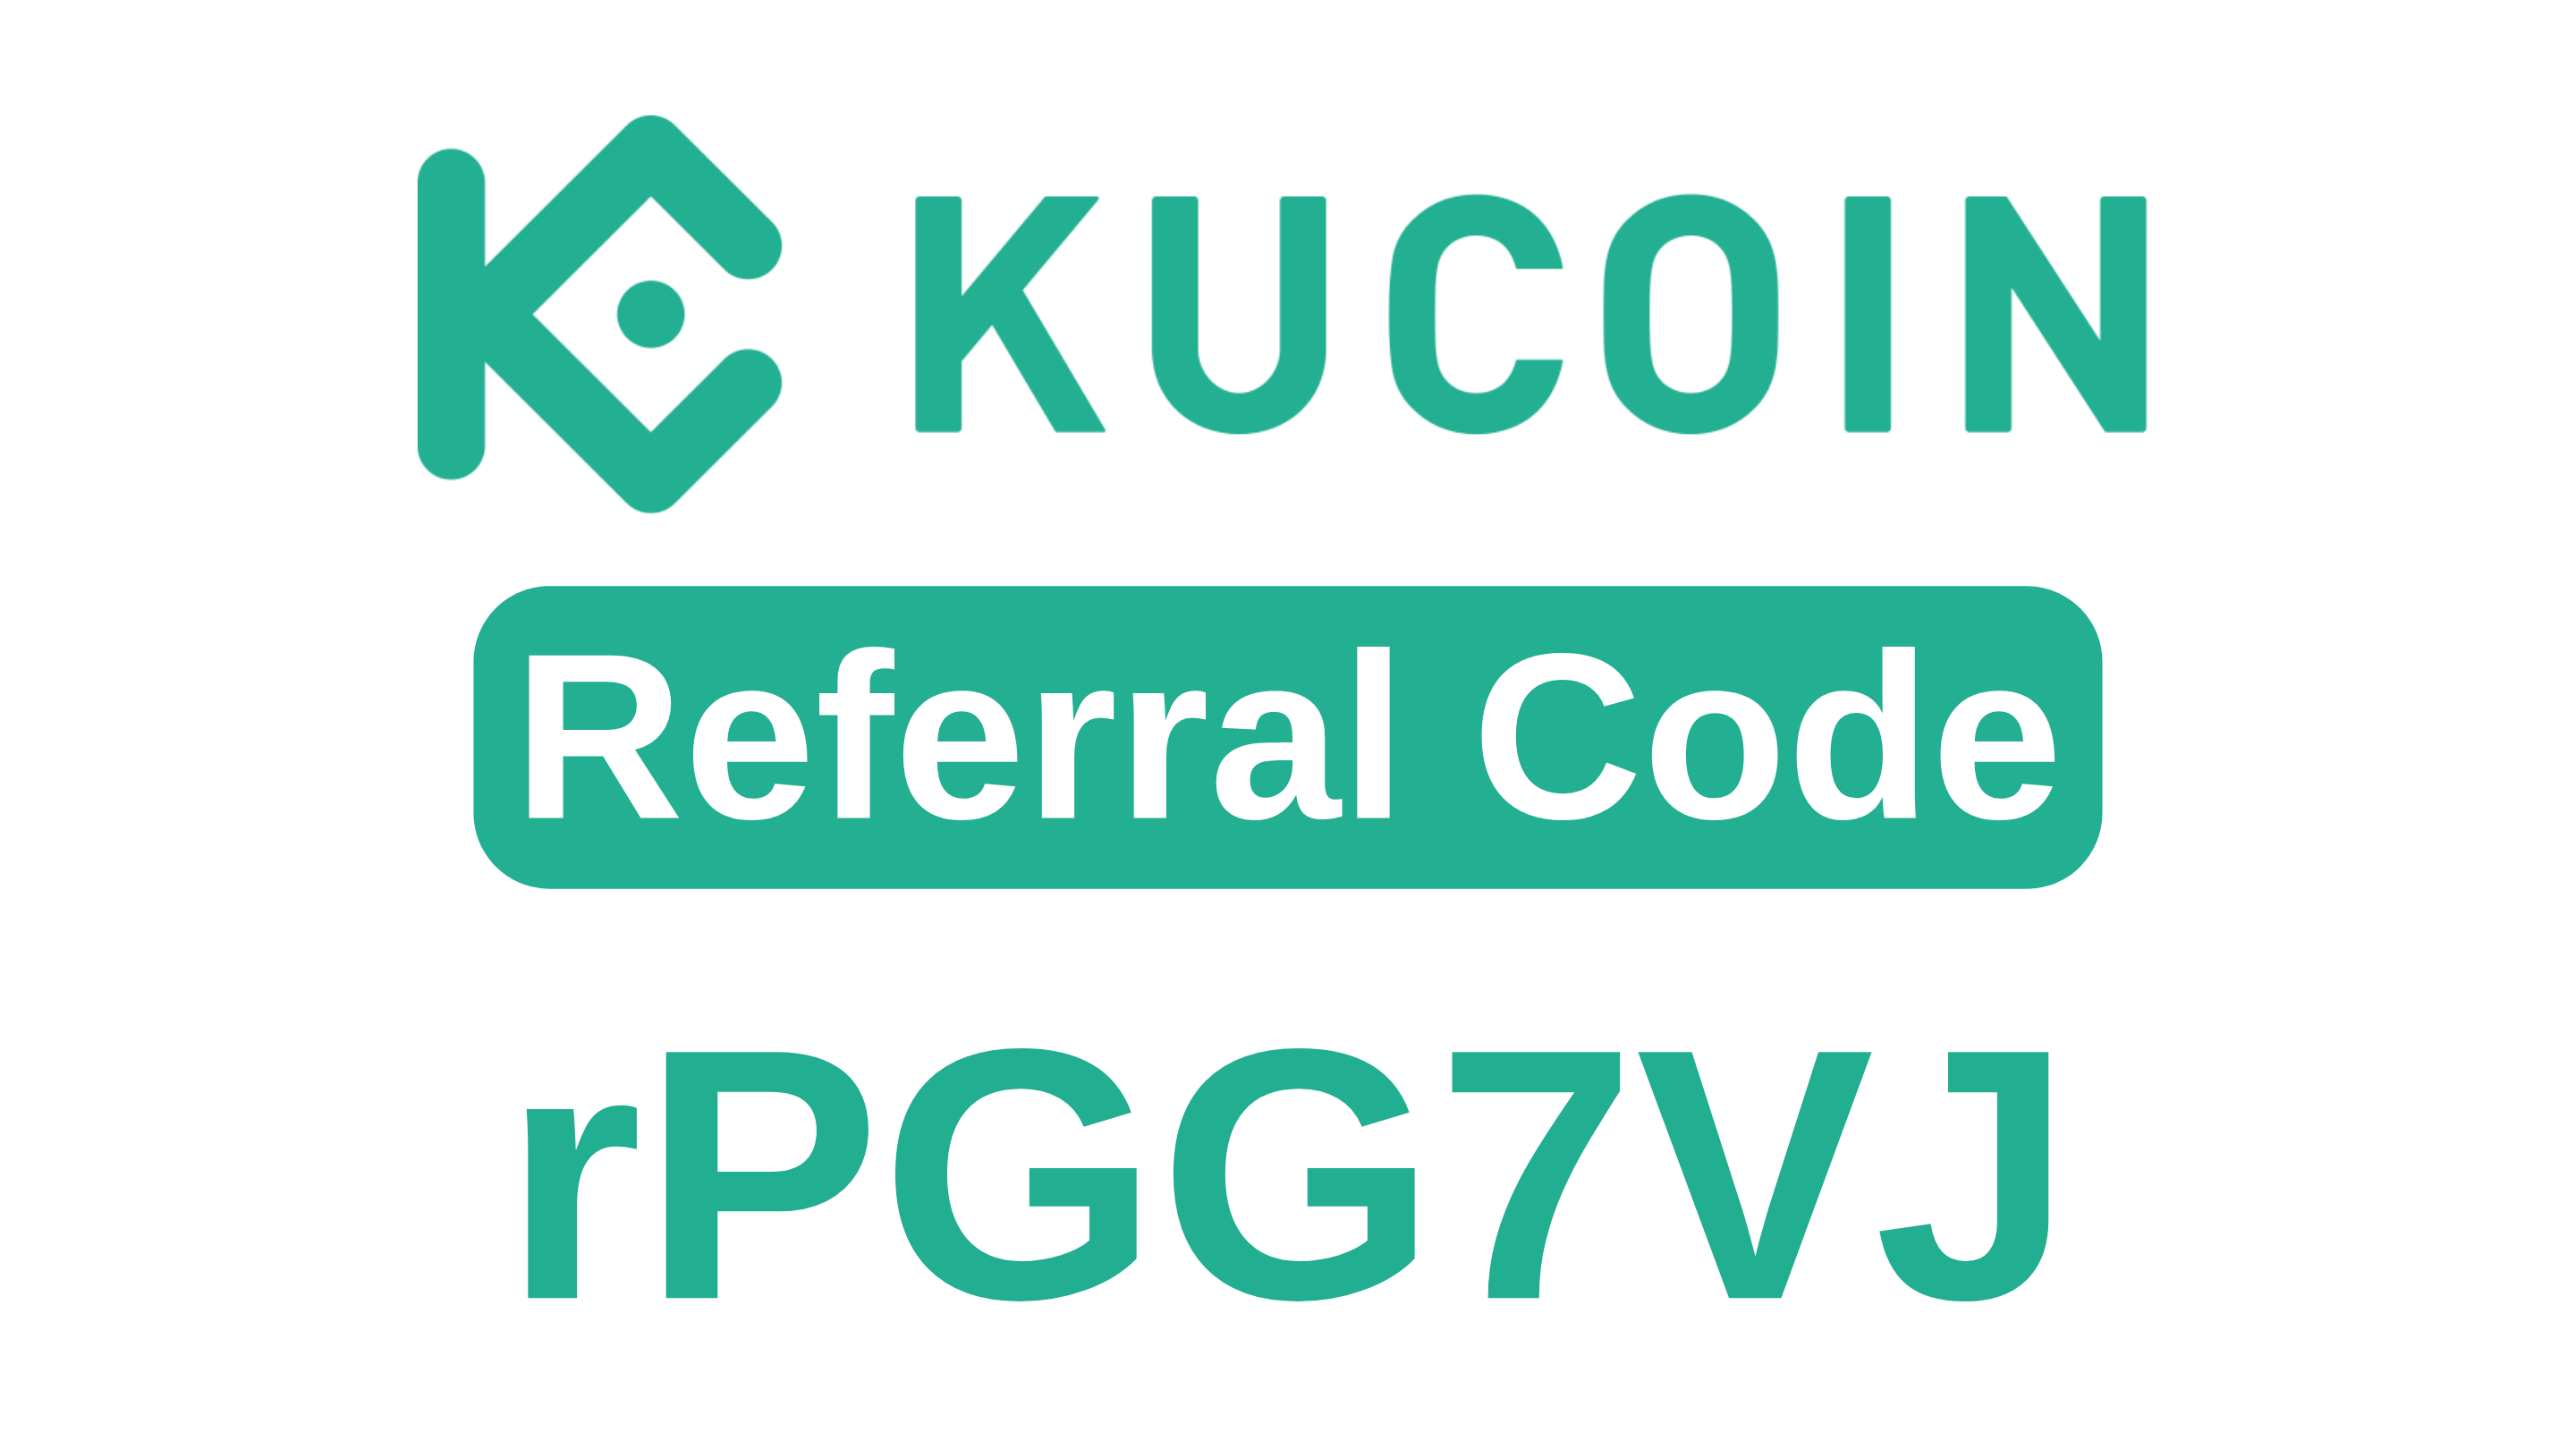 kucoin signup with referral code